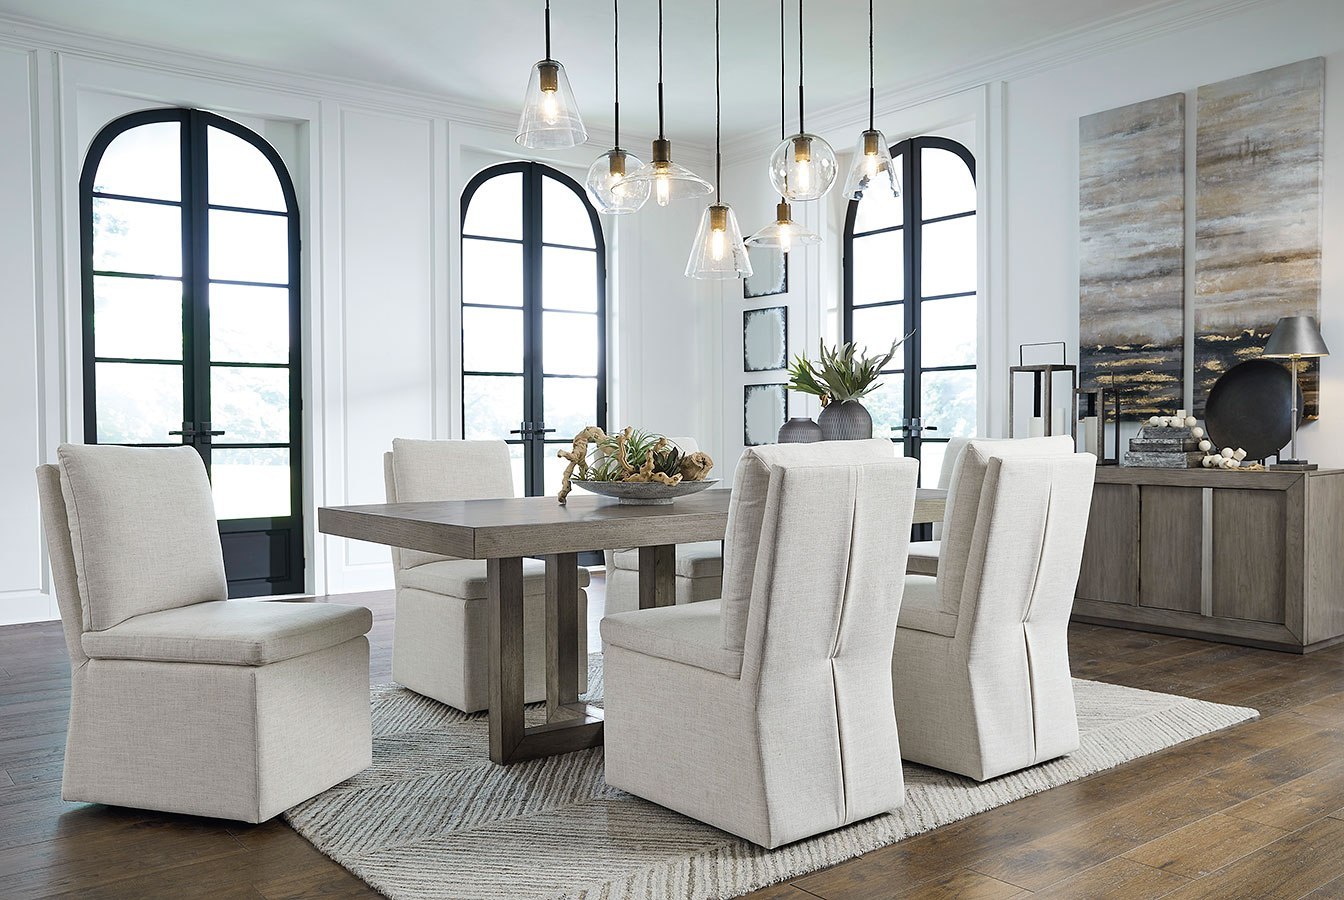 oatmeal dining room chairs